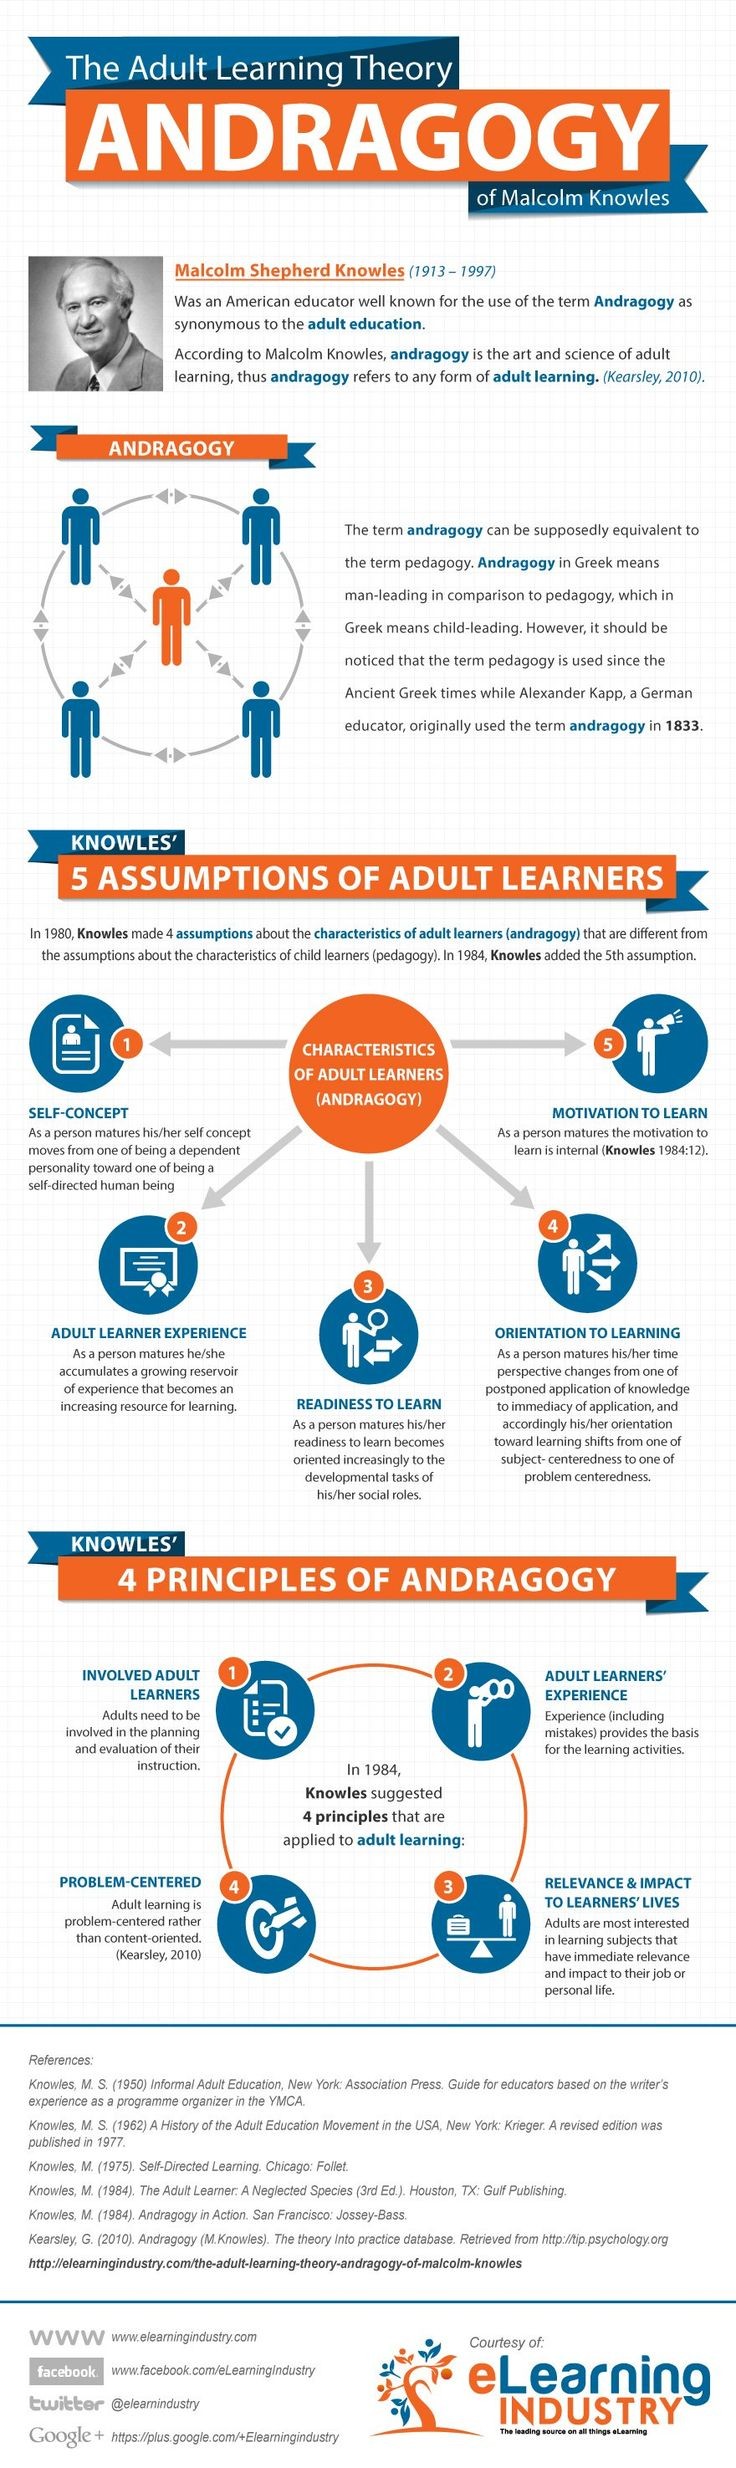 Malcolm Knowles’  Adult Learning Theory...